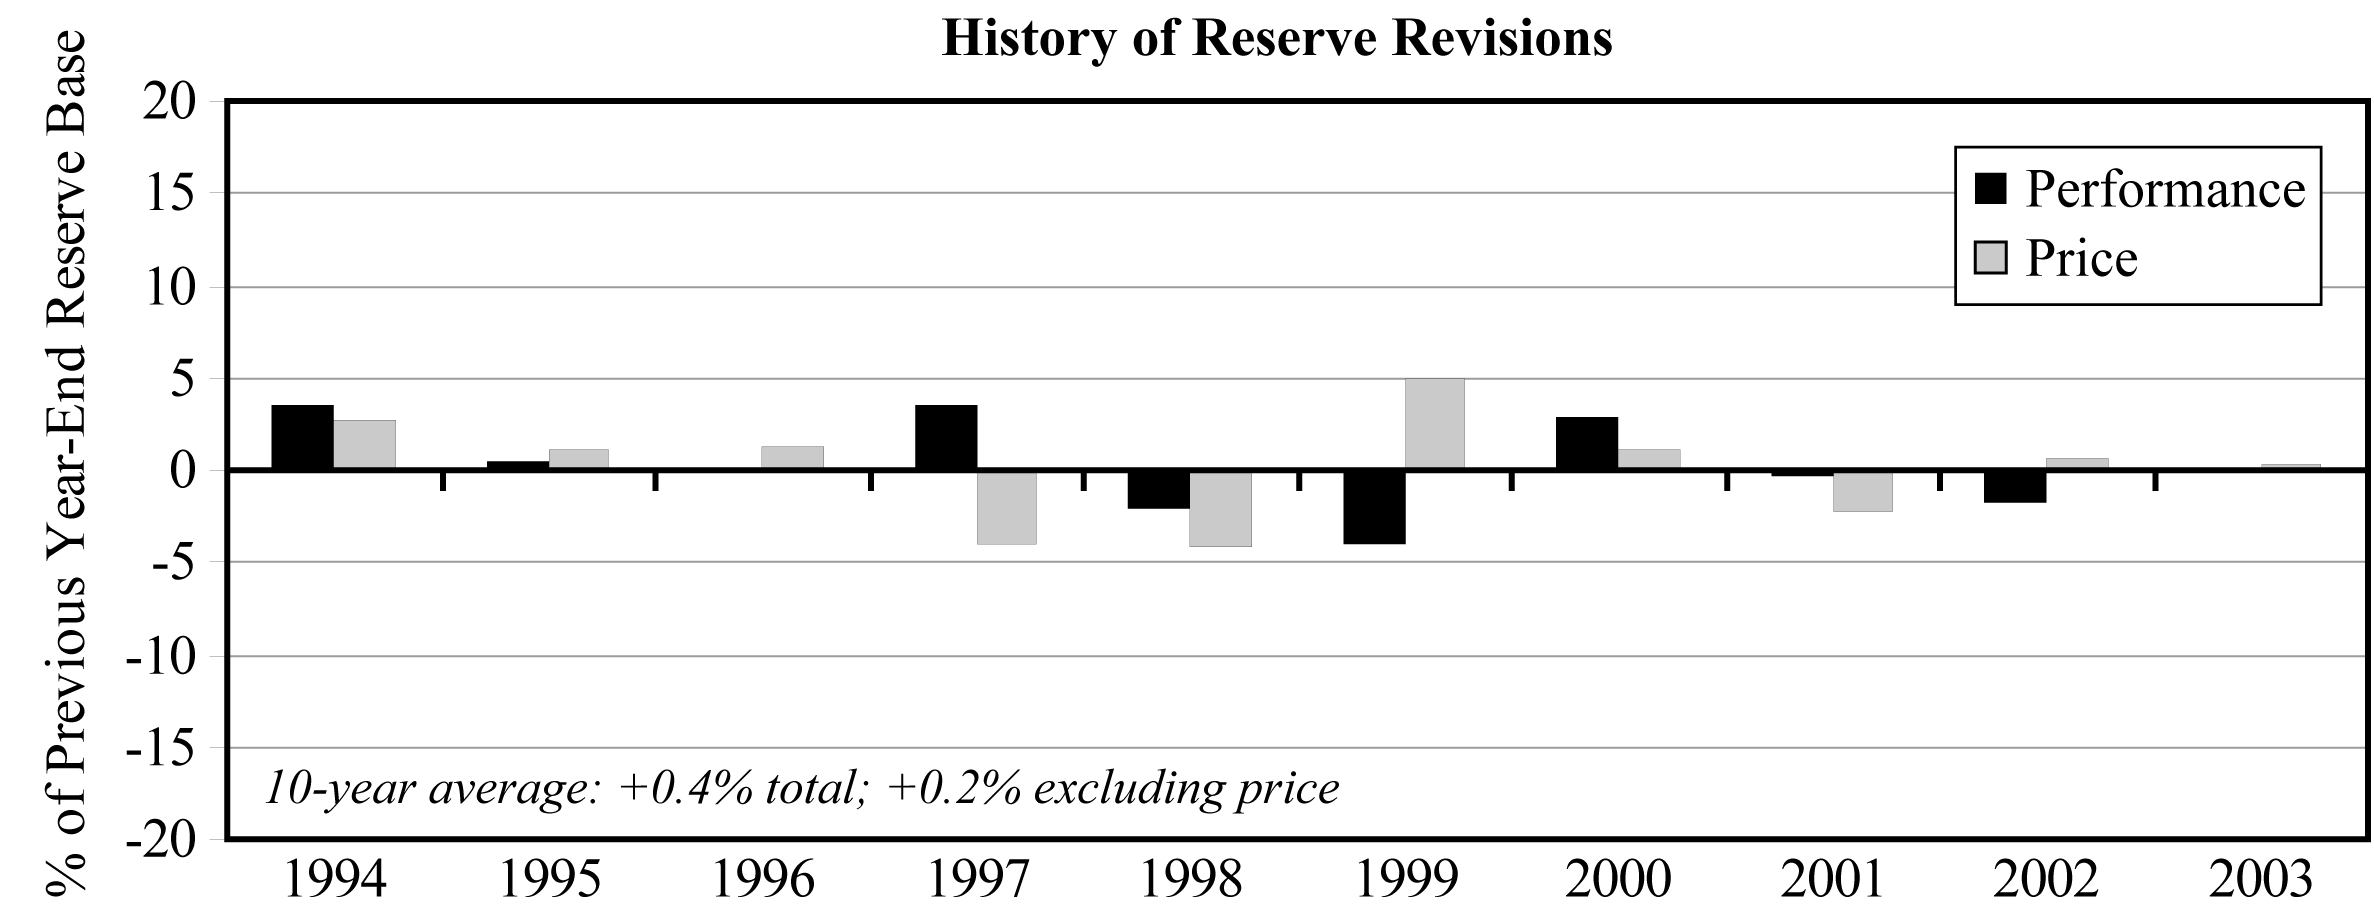 CHART: History of Reserve Revisions